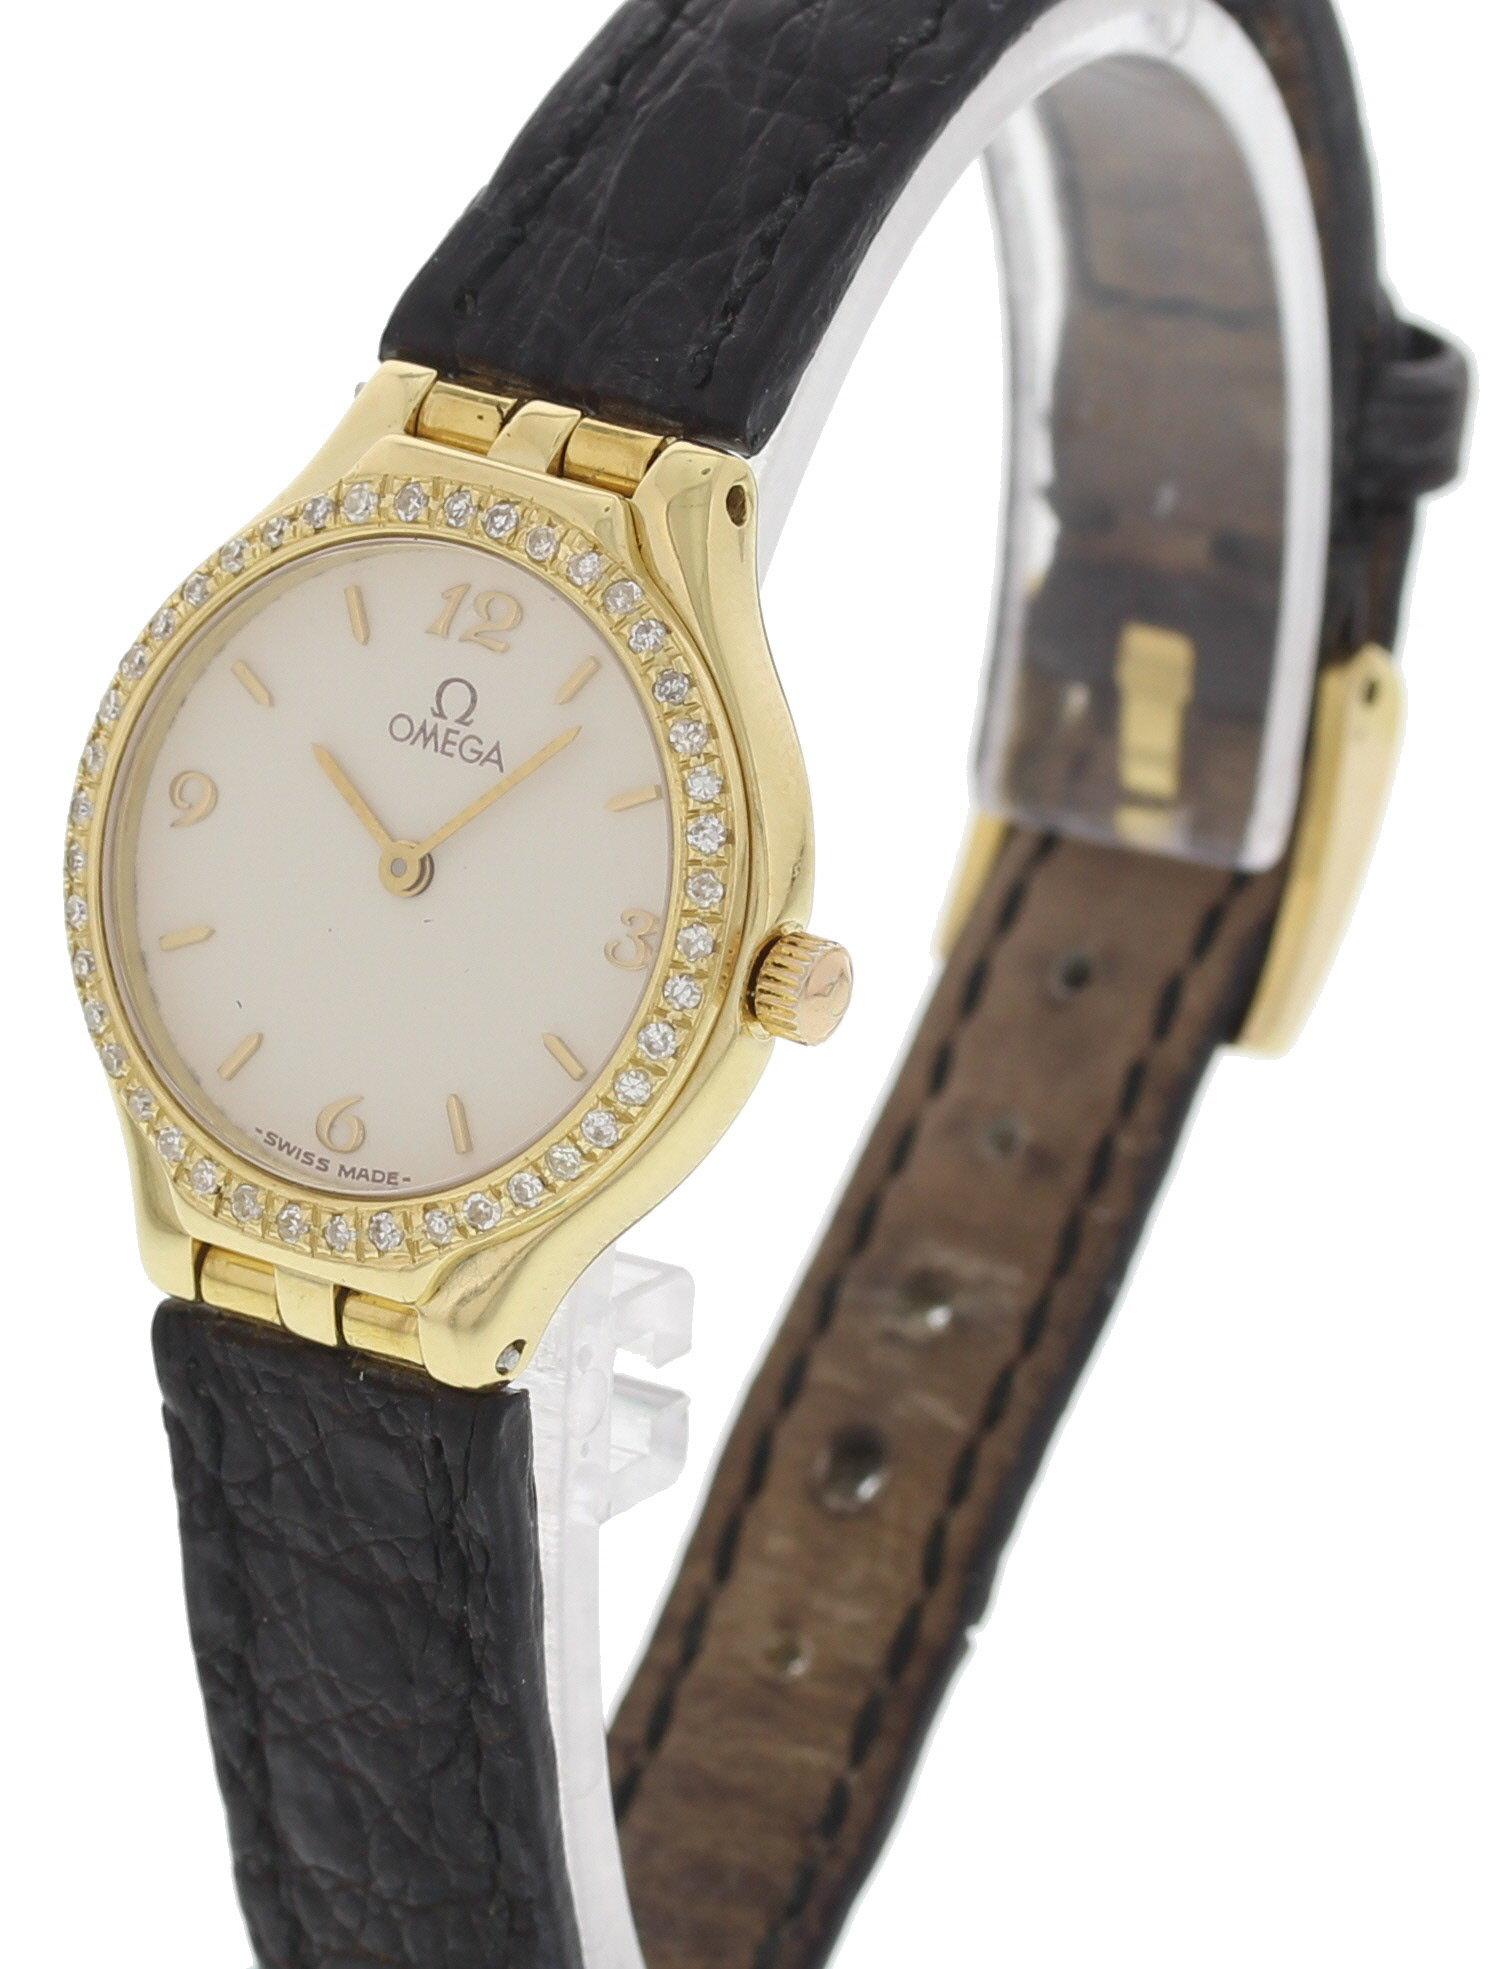 A ladies Omega 18k yellow gold diamond watch with an adjustable black leather band. It has a 23 mm 18k yellow gold case. This is a quartz: battery watch with an analog display.
